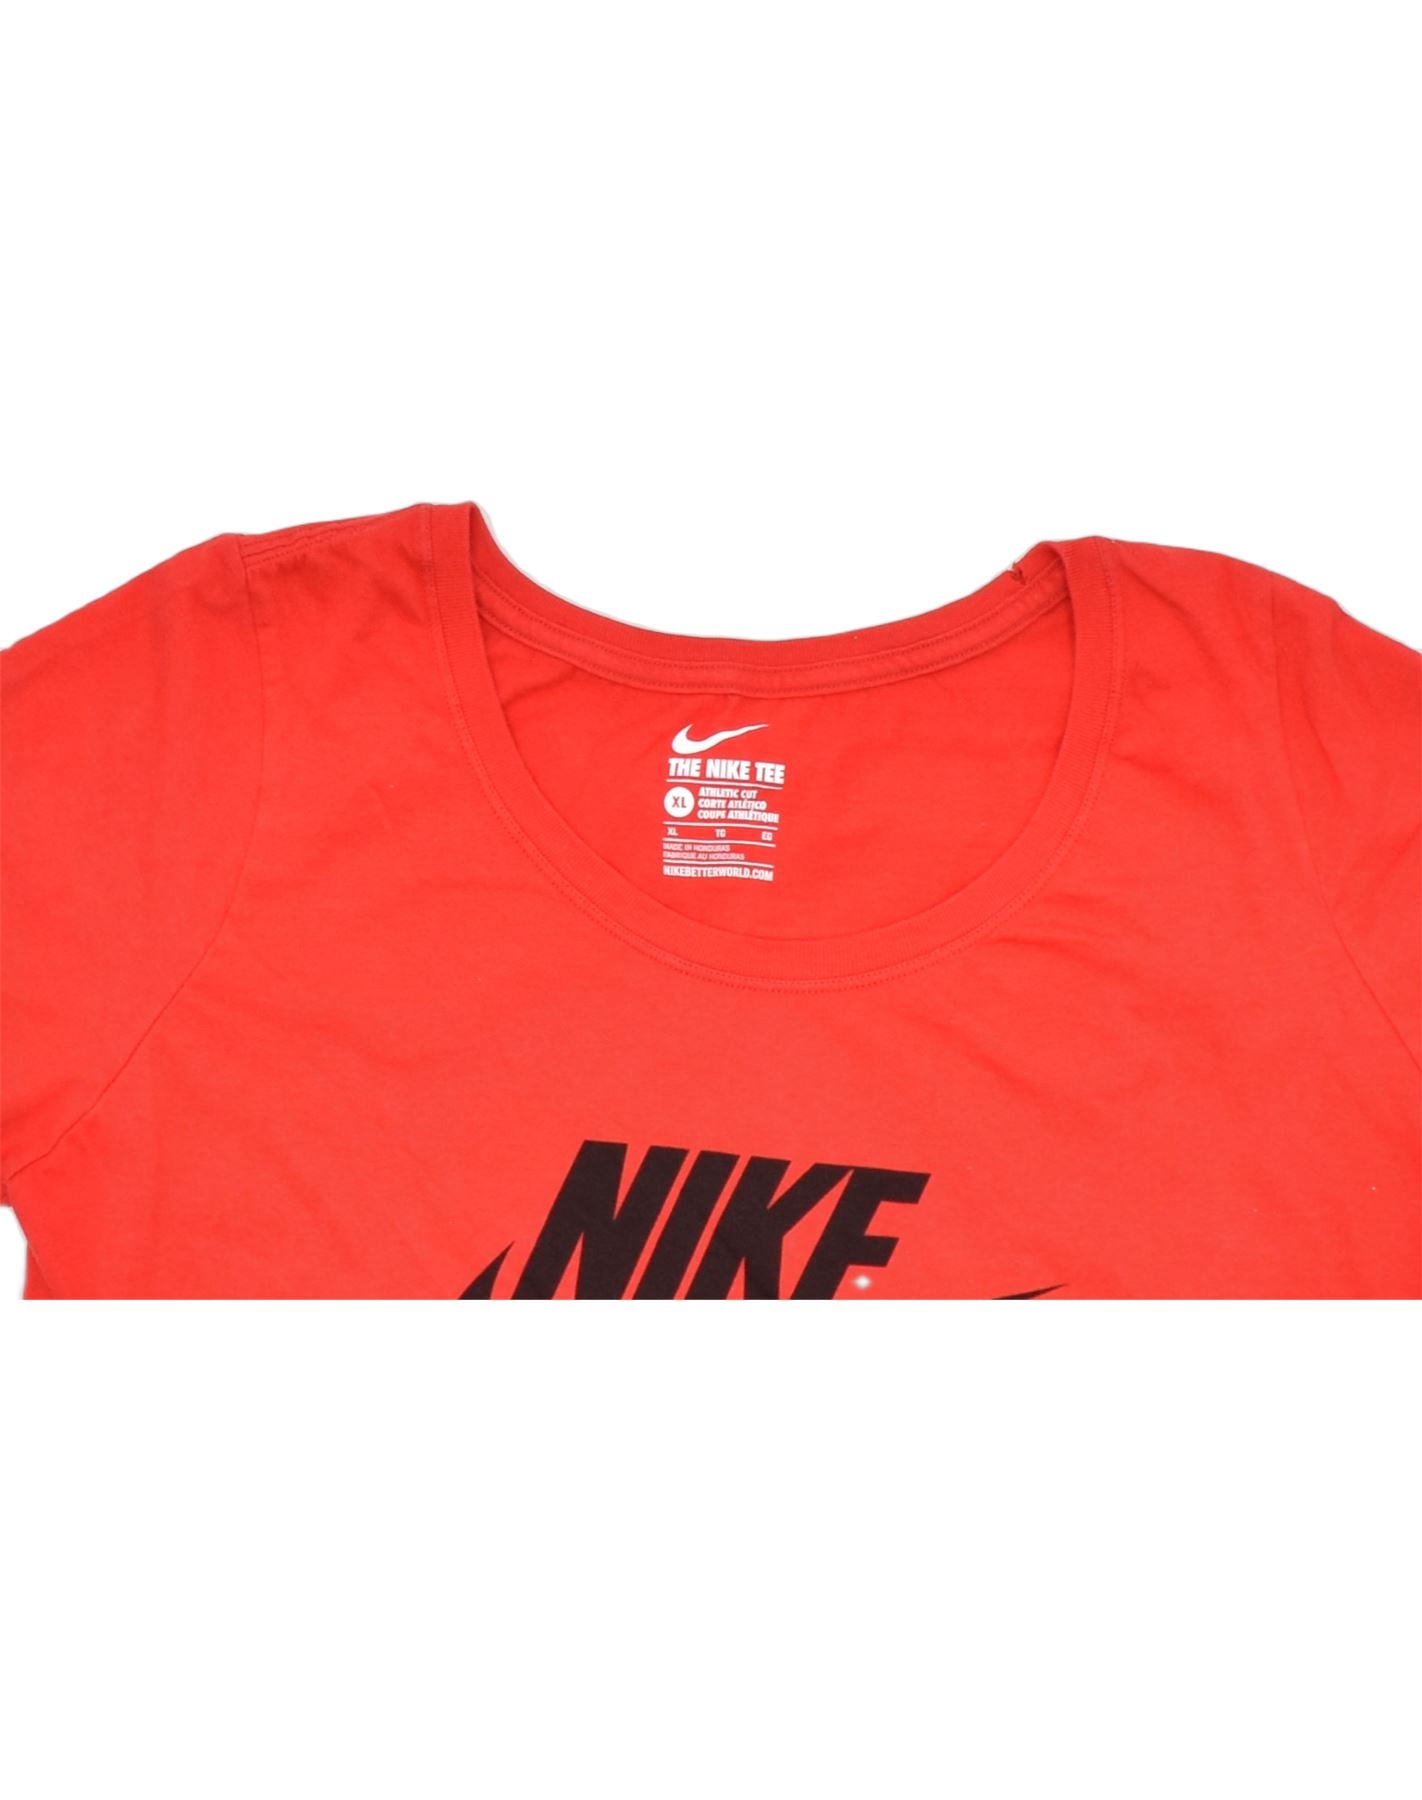 NIKE Womens Athletic Cut Graphic T-Shirt Top UK 18 XL Red Cotton, Vintage  & Second-Hand Clothing Online